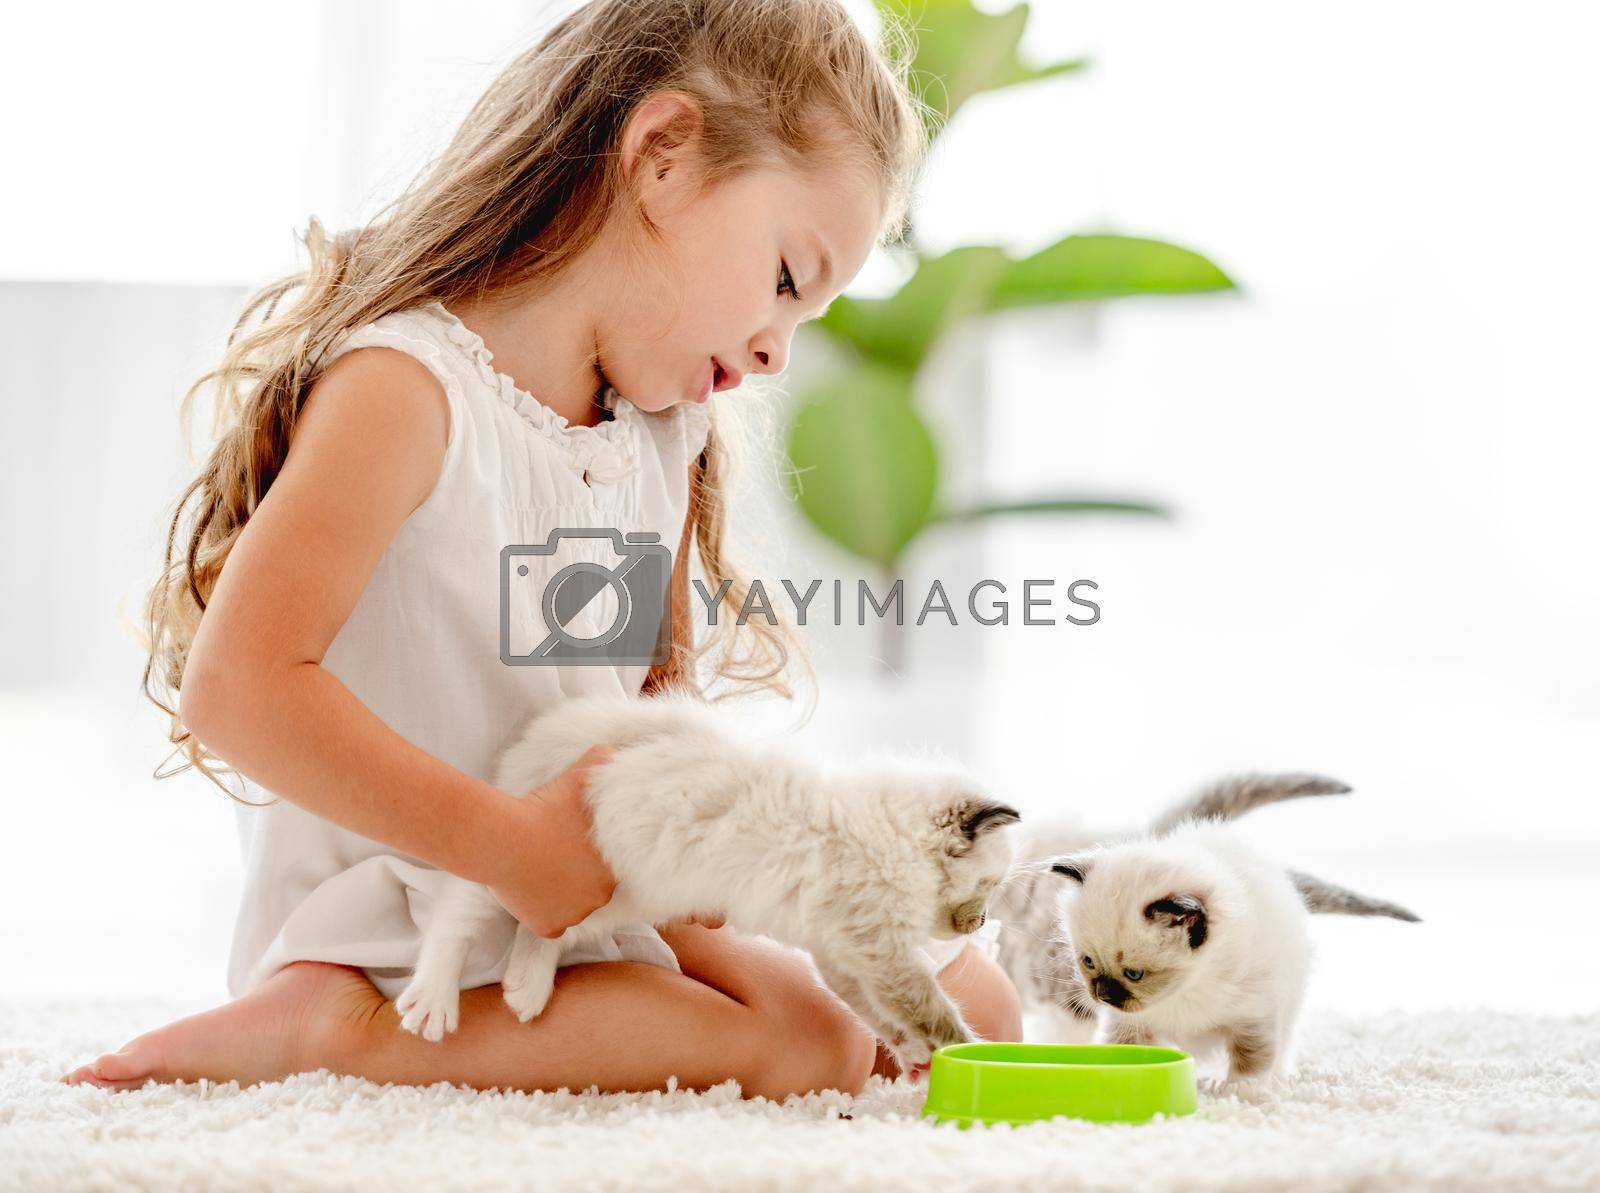 Child girl feeding ragdoll kittens from bowl on the floor. Little female person cares about kitty pets at home